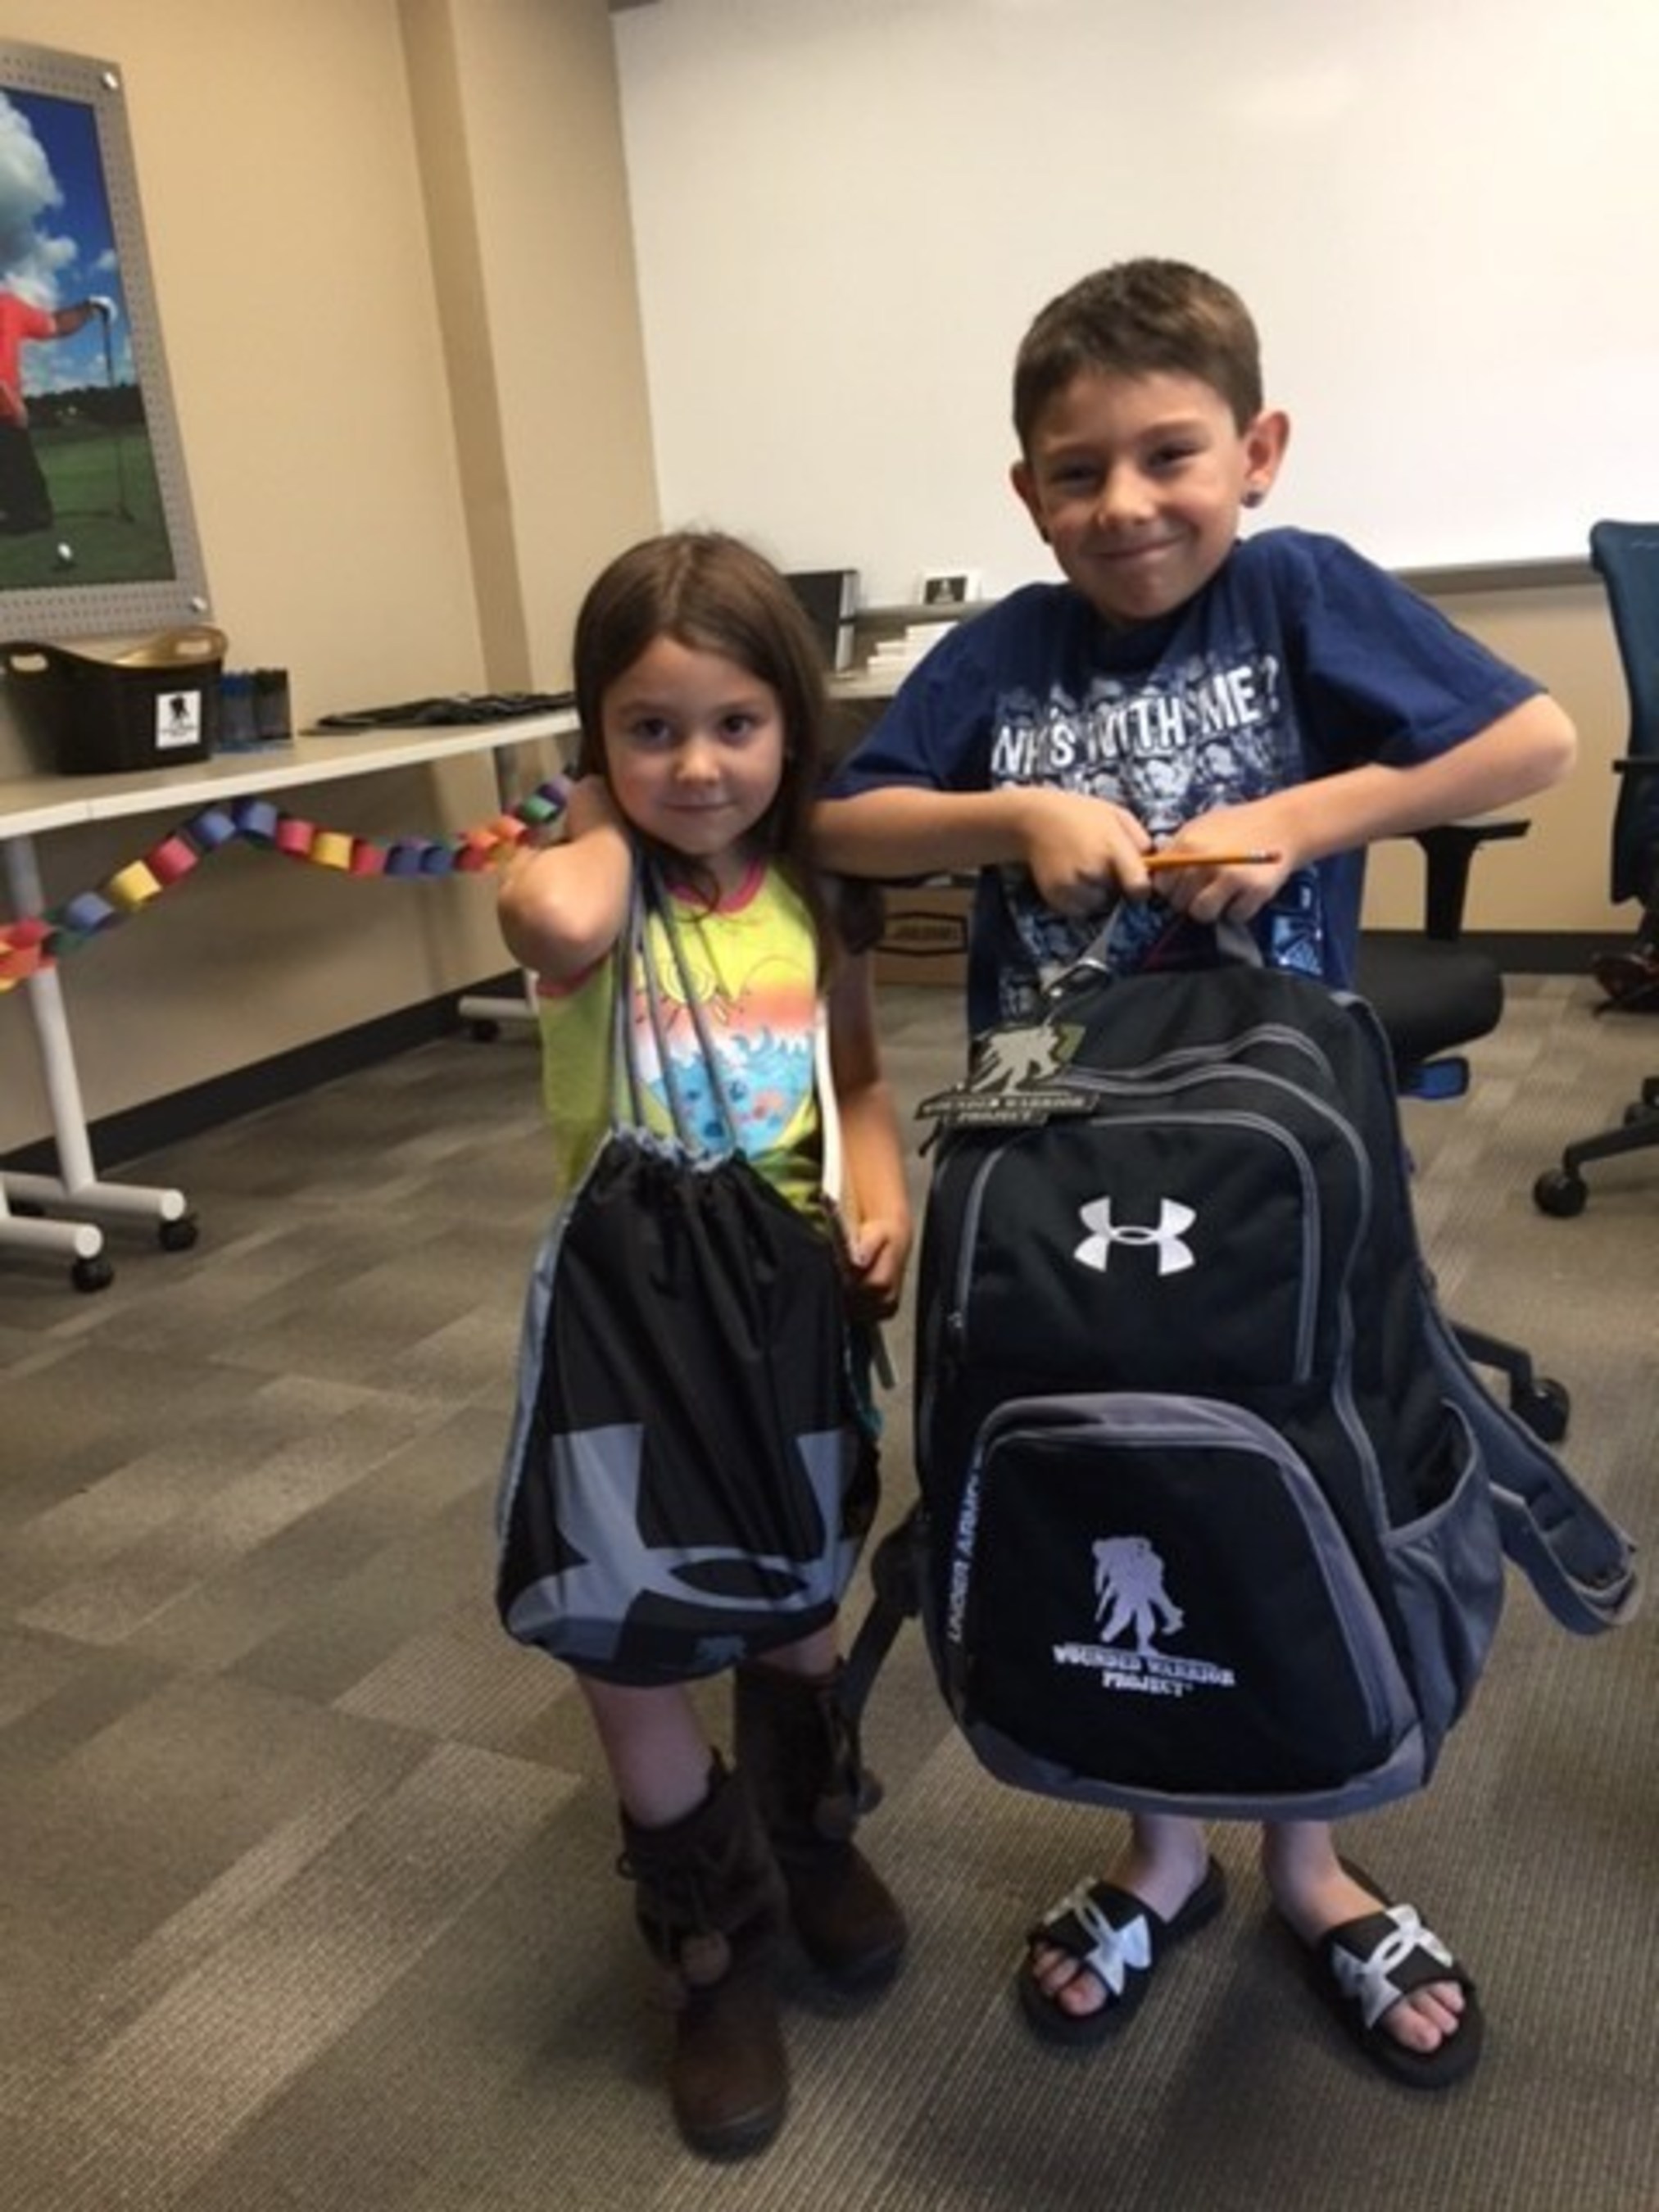 Children of injured veterans were given supply-filled backpacks as part of a recent Wounded Warrior Project back-to-school open house.